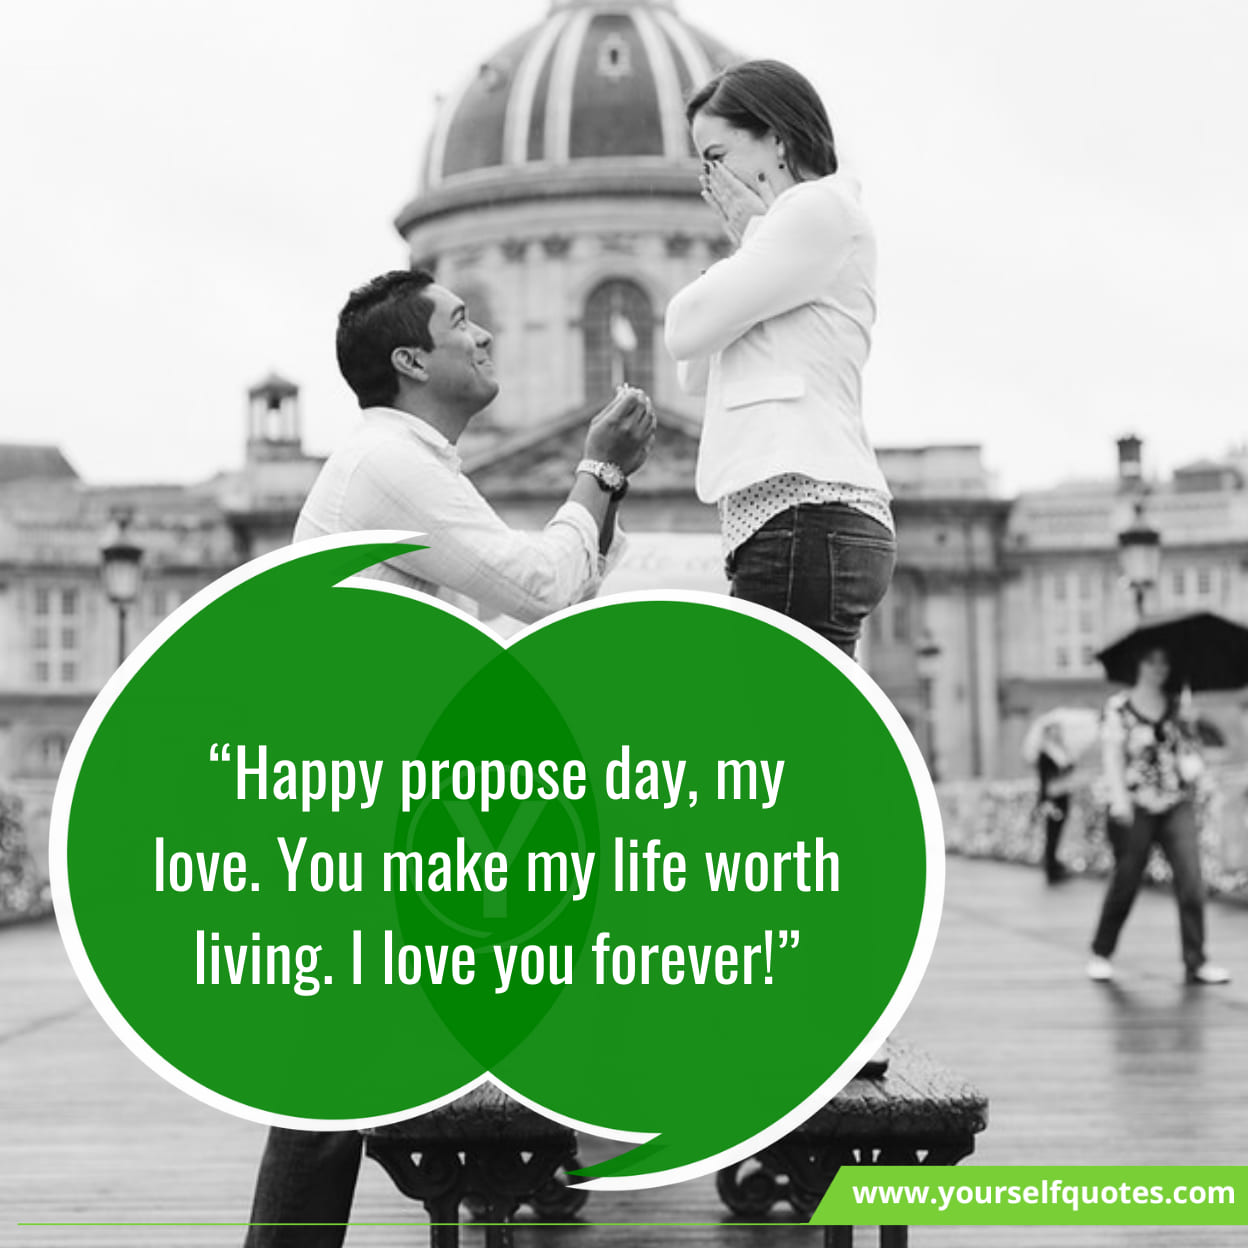 Propose Day Messages & Sayings